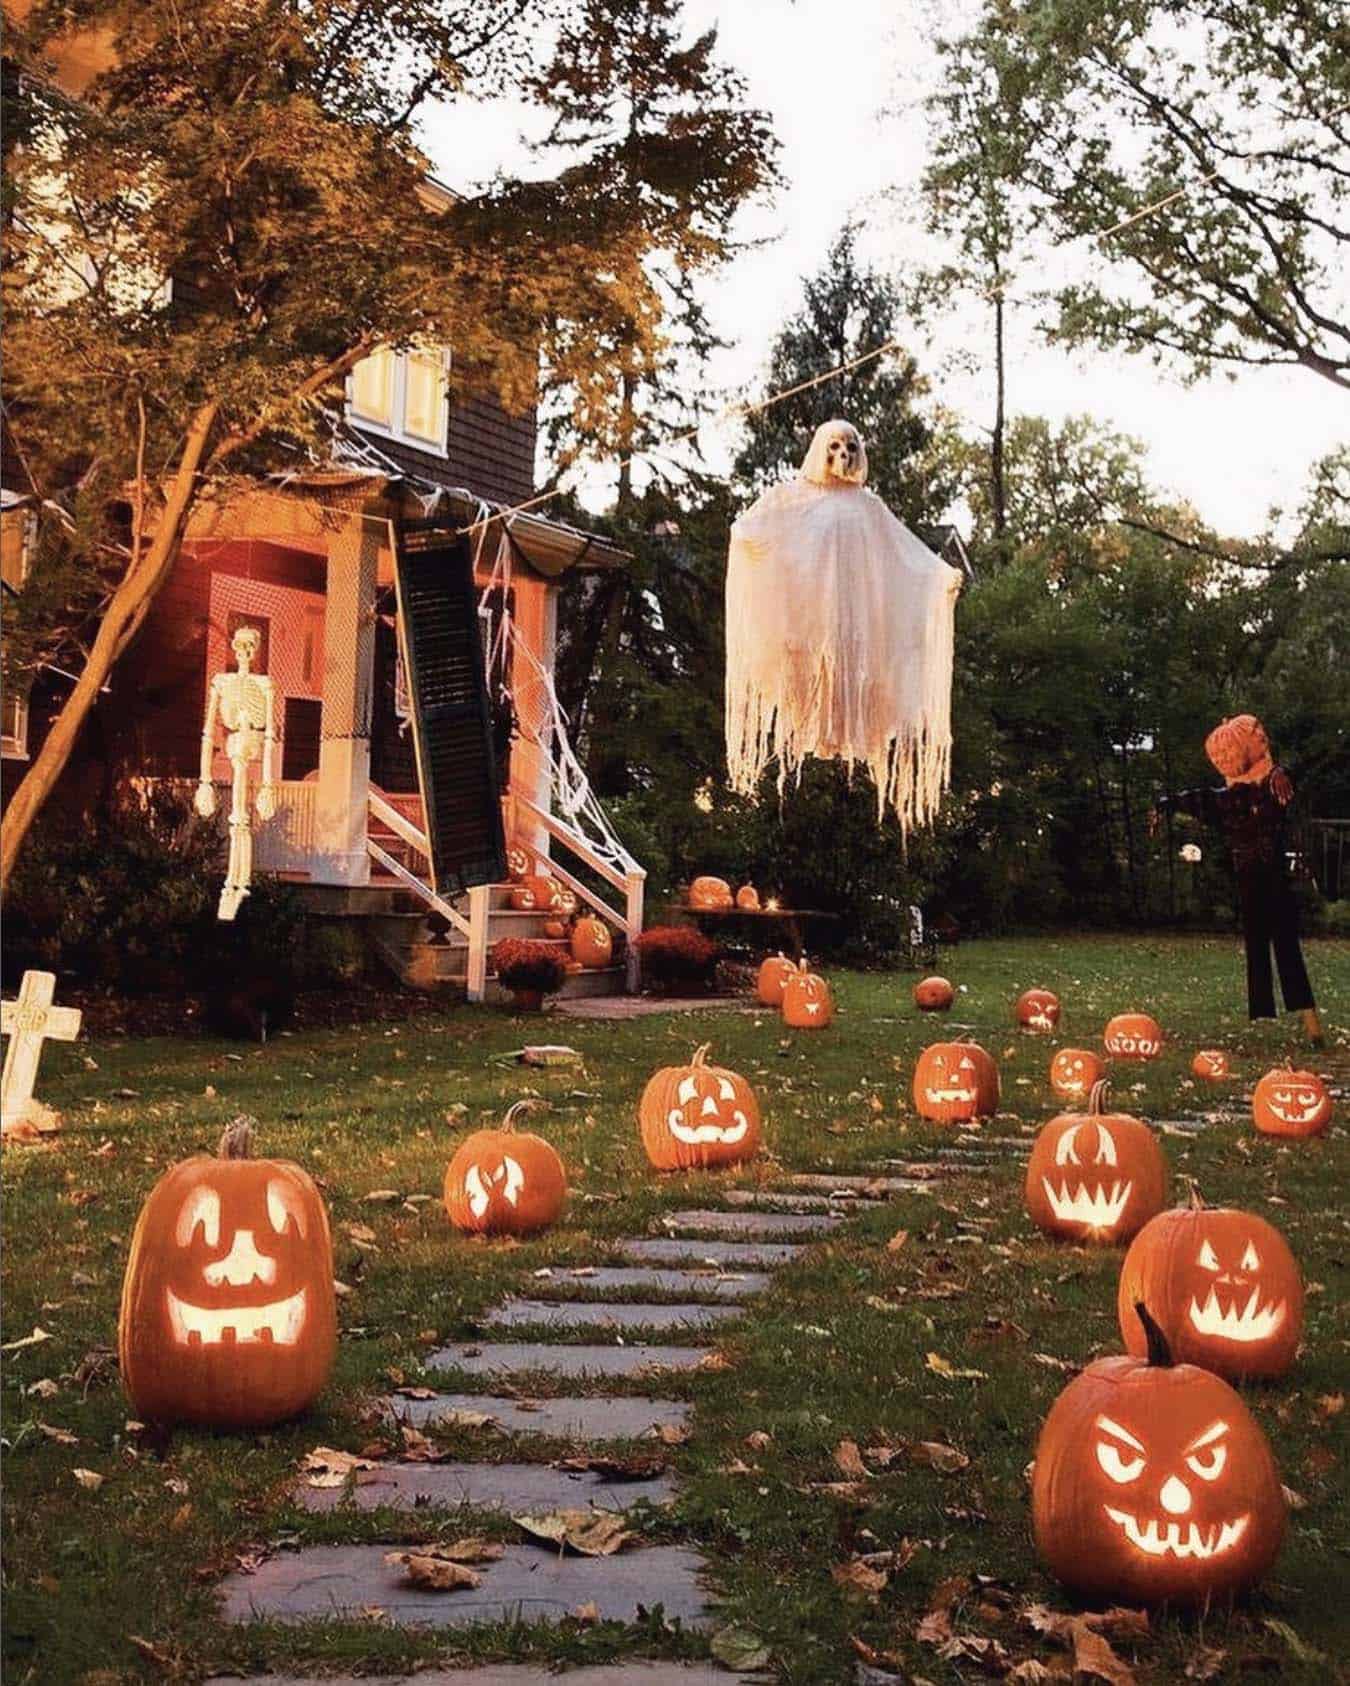 outdoor halloween decorations with pumpkins and ghastly ghosts hanging from the trees